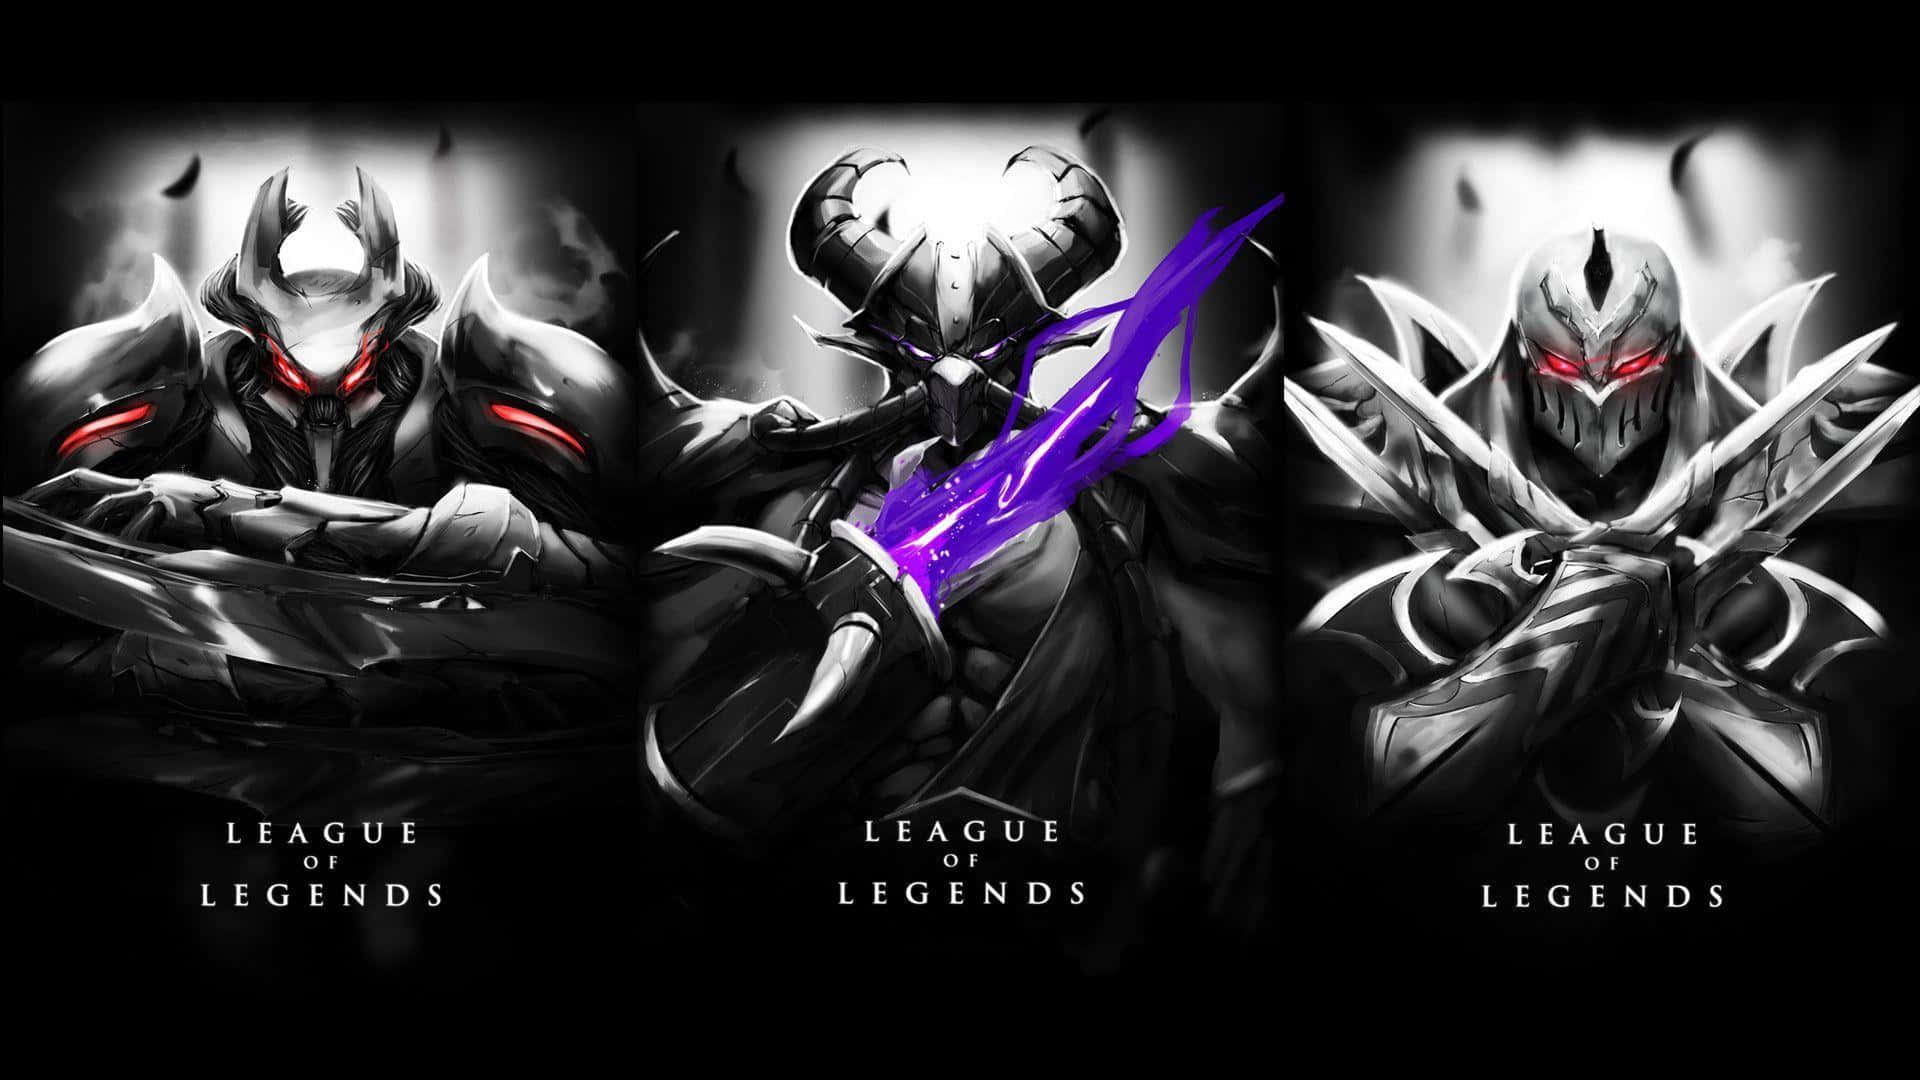 Enter the world of Valoran and fight in the League of Legends Wallpaper